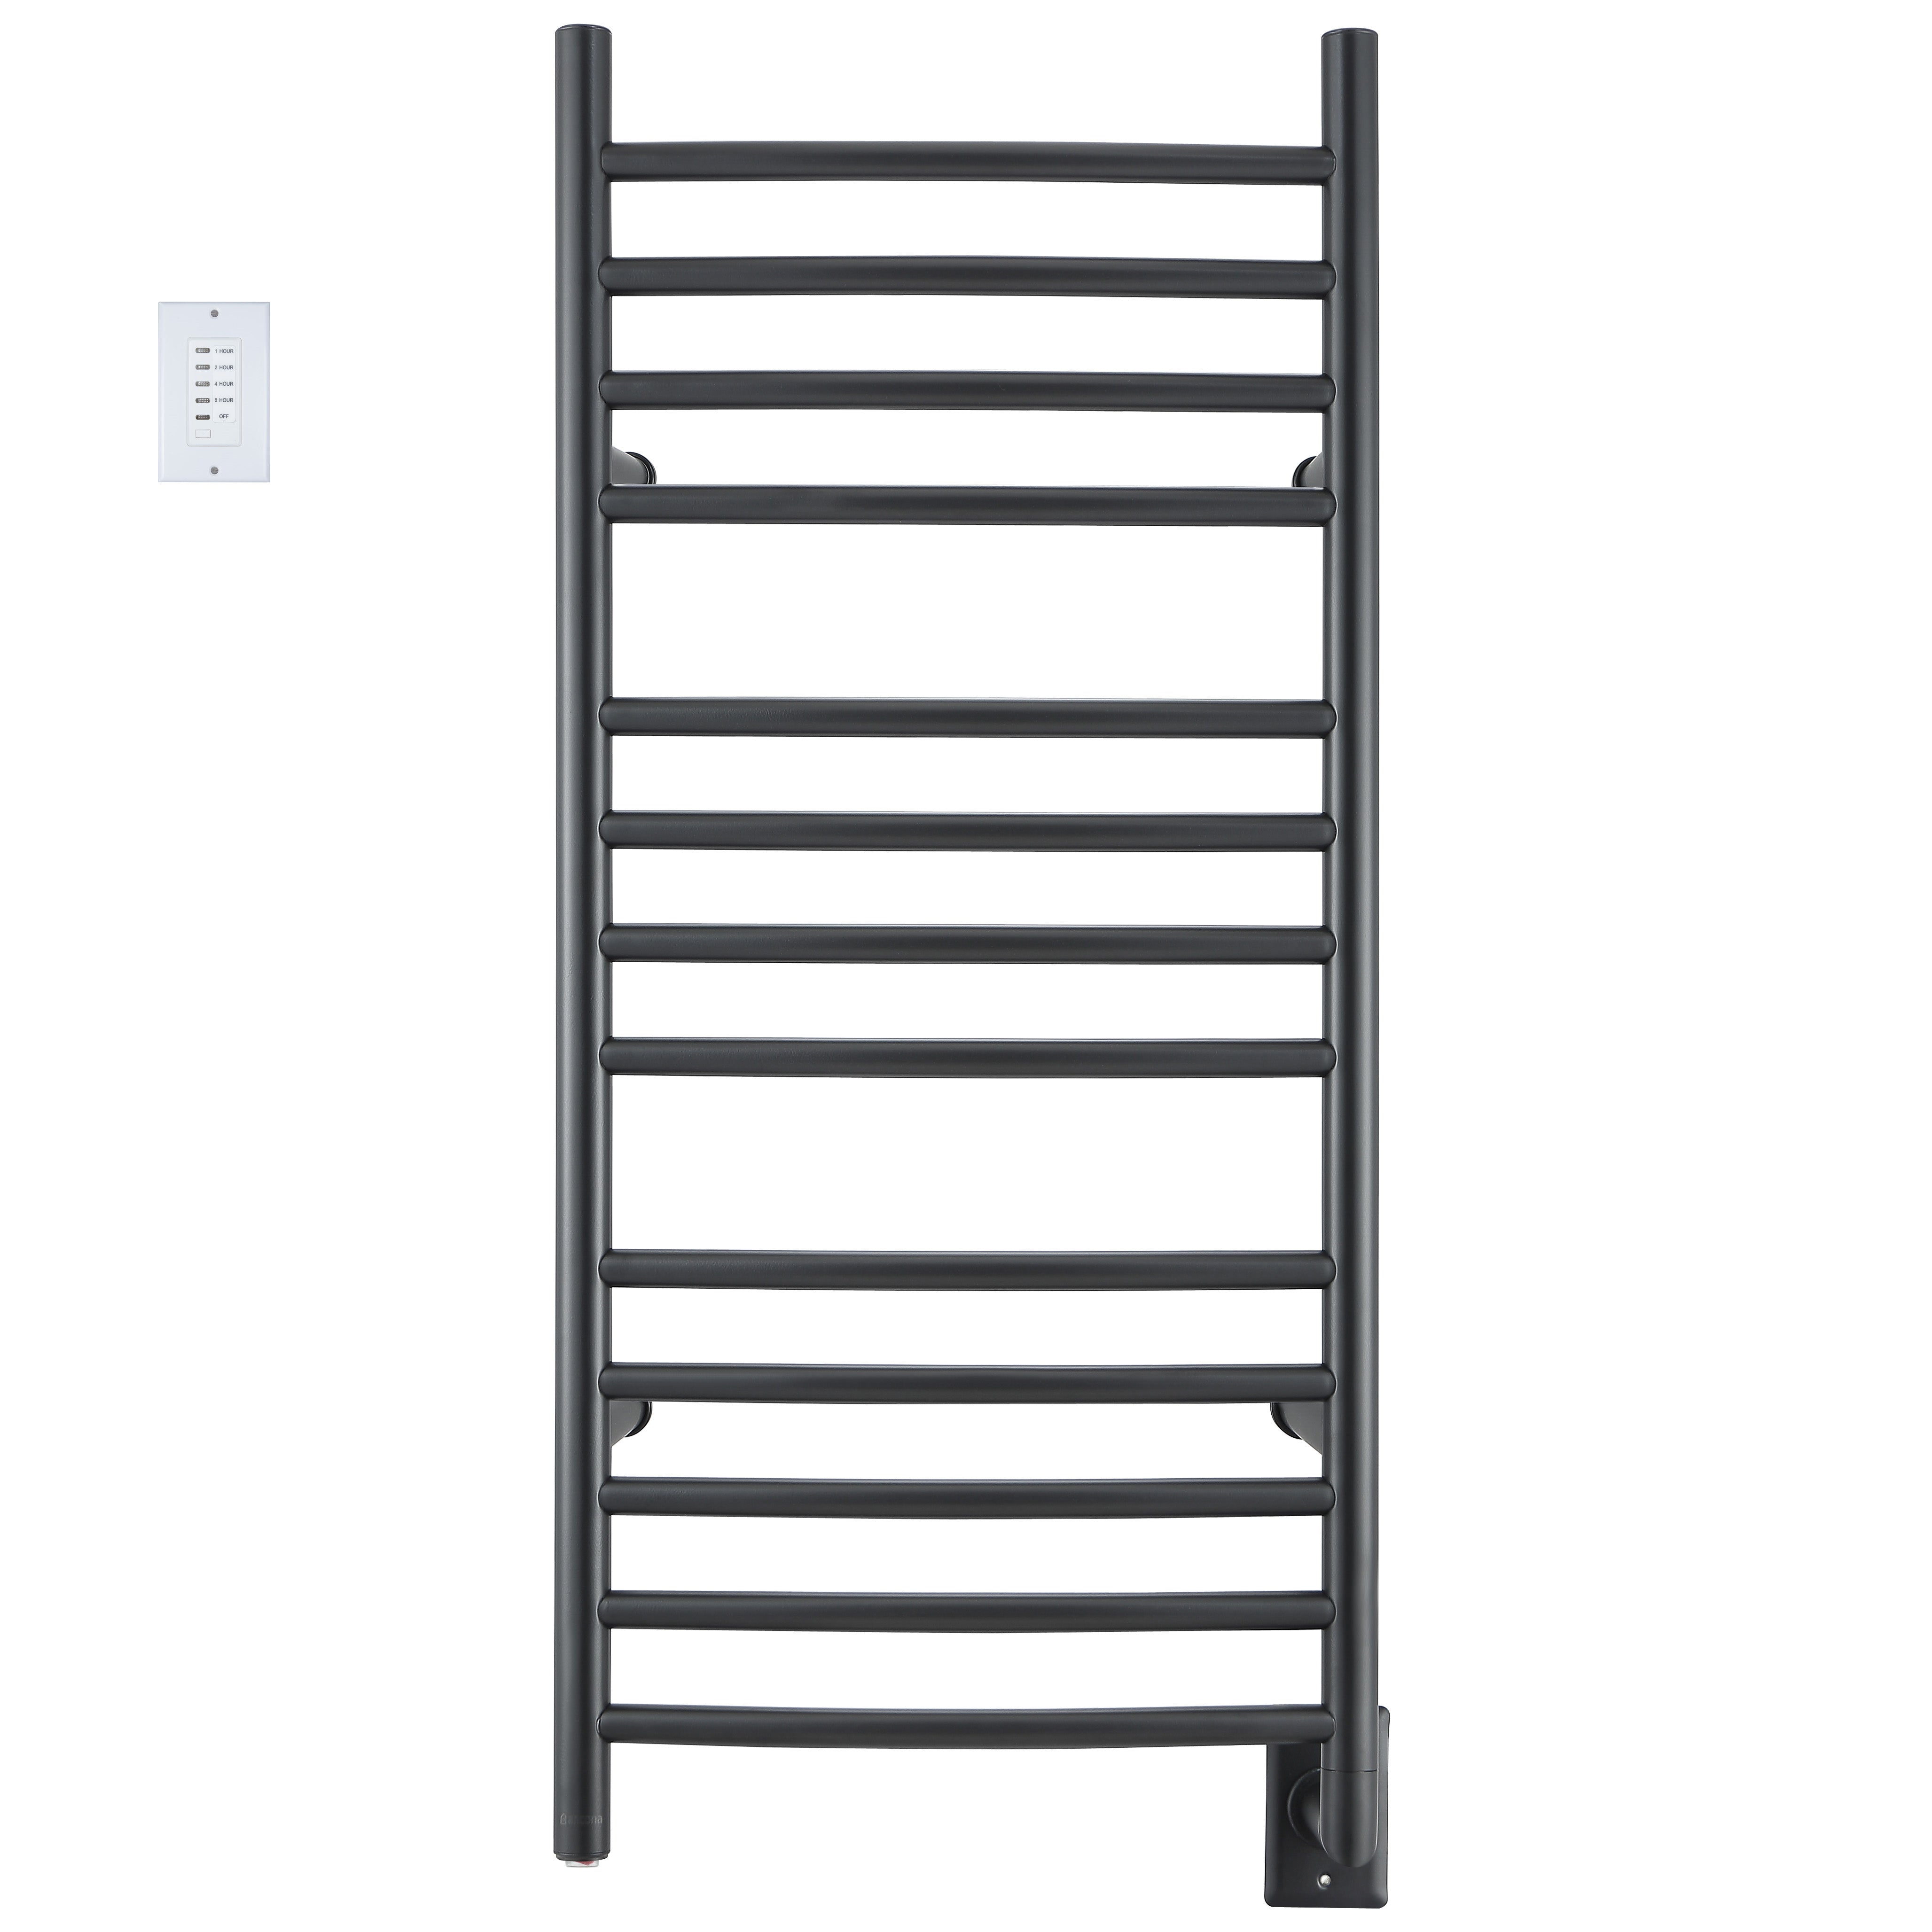 Ancona Svelte Rounded 13-Bar Hardwired Towel Warmer with Wall Countdown Timer in Matte Black